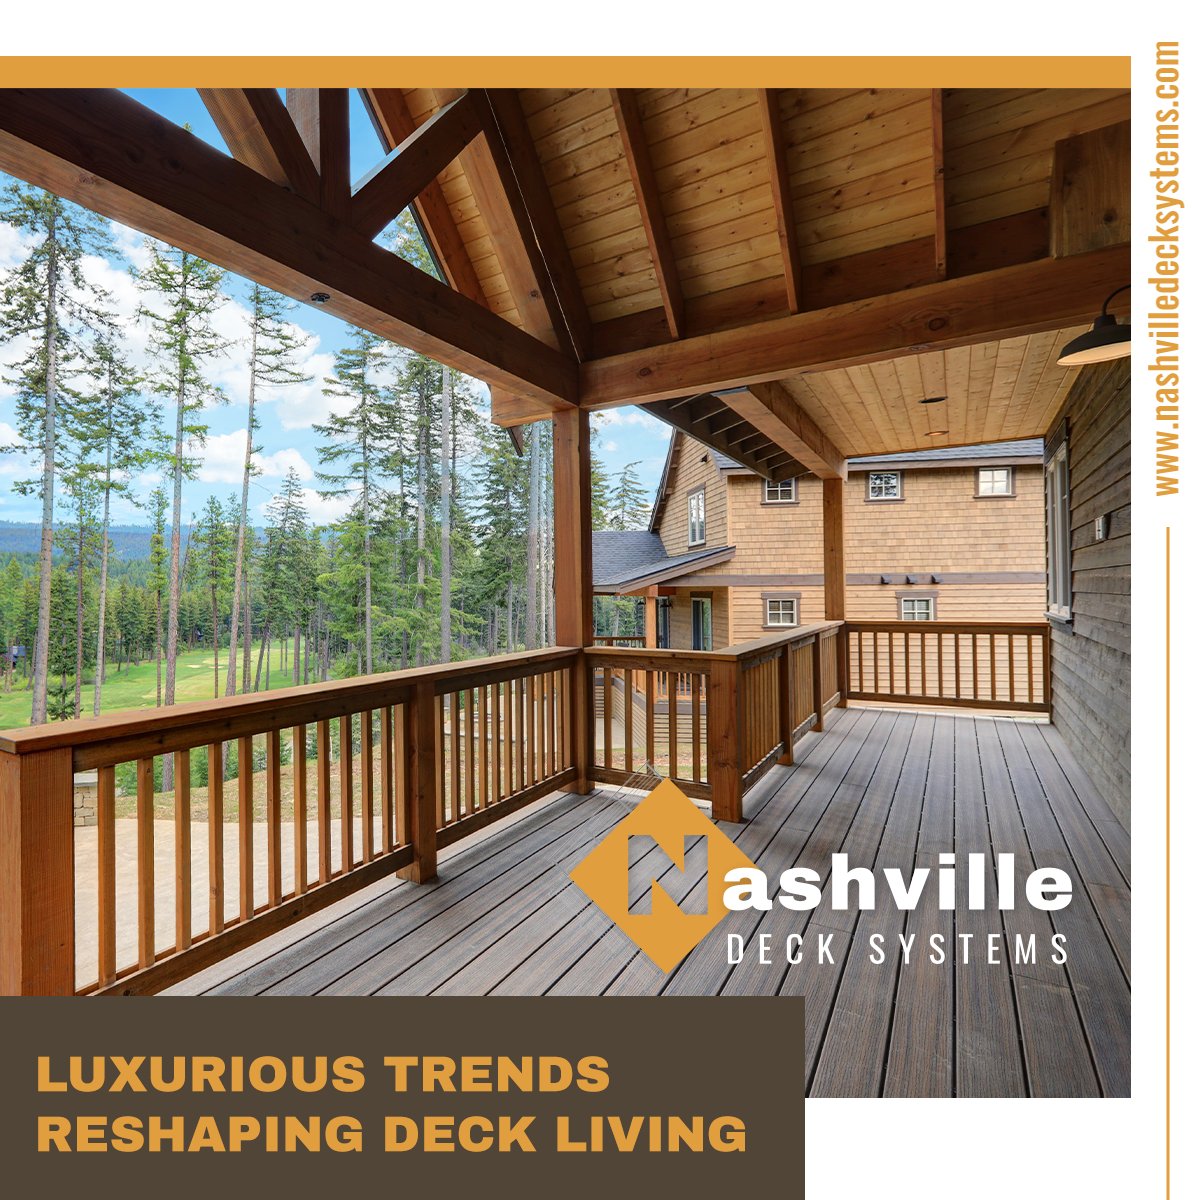 We’re thrilled to share the most cutting-edge design trends reshaping the landscape of decking and outdoor living in 2023!

Call (615) 985-5645

vist.ly/ydq7

#nashvilledecksystems #deckdesign #designtrends #outdoorspace #outdoorkitchen